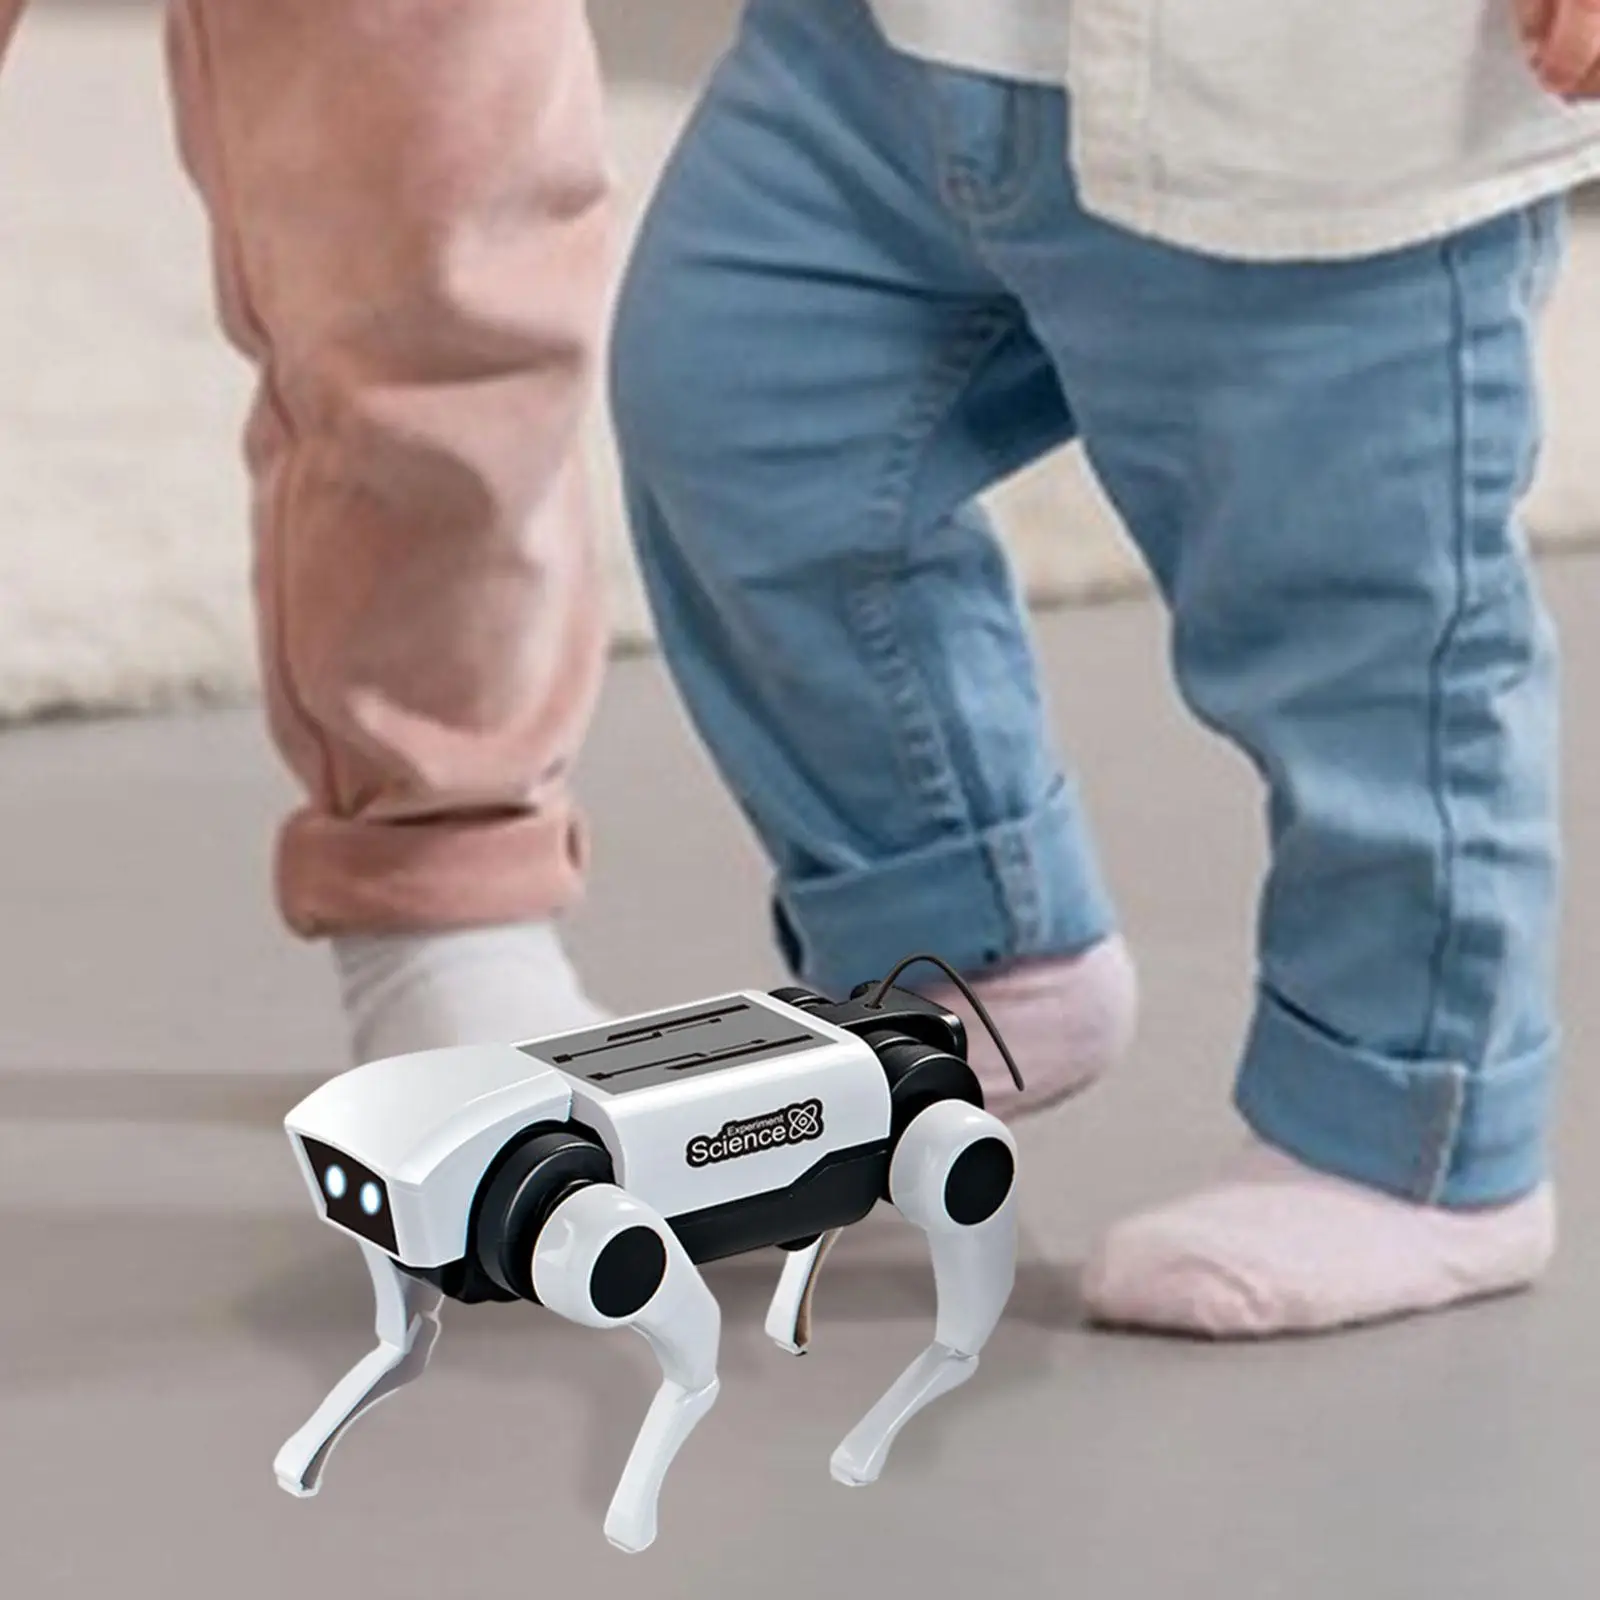 Electric Mechanical Dog Stem DIY Self Assembly Interactive Remote Control Puppy Toy for Boys Kids Adults Teens Birthday Gifts